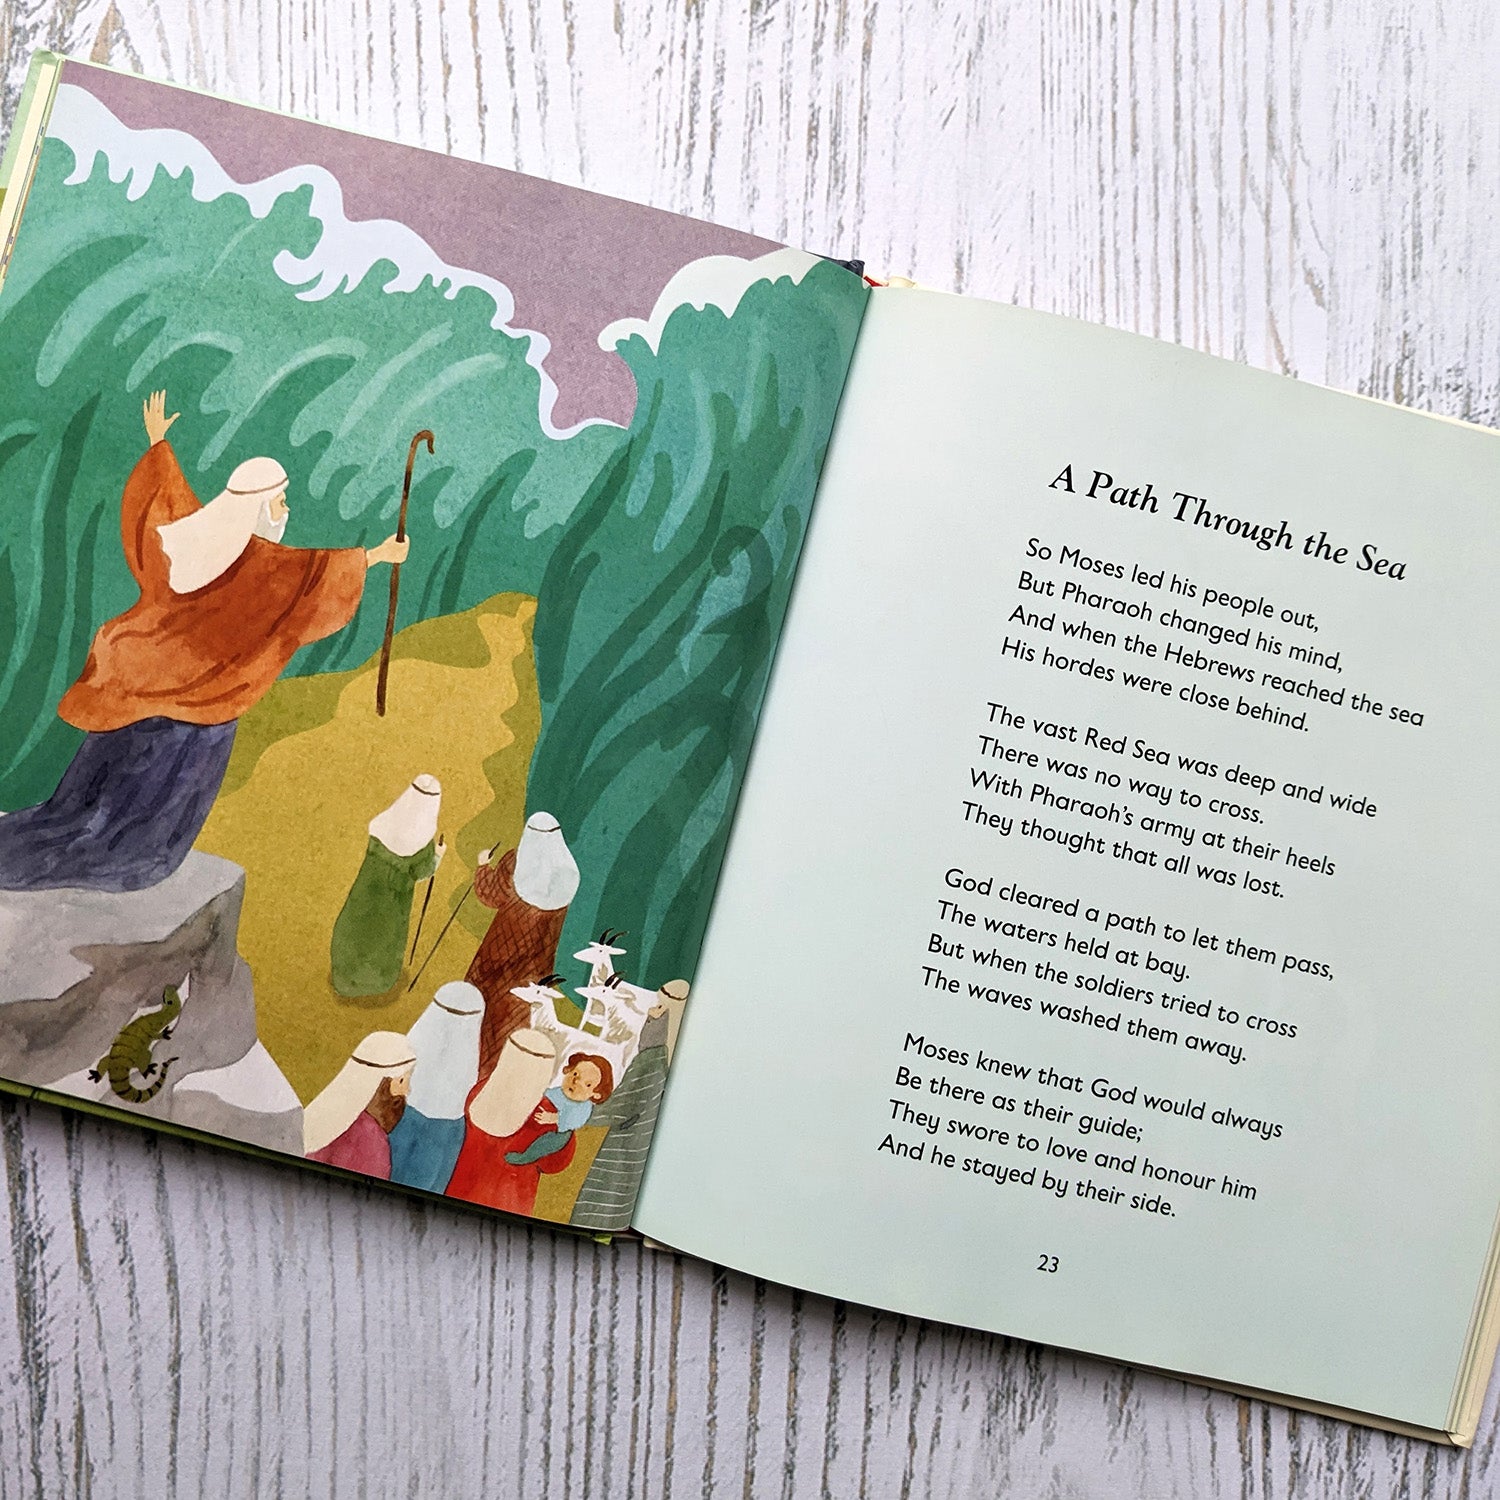 The Children's Rhyming Bible - The Christian Gift Company